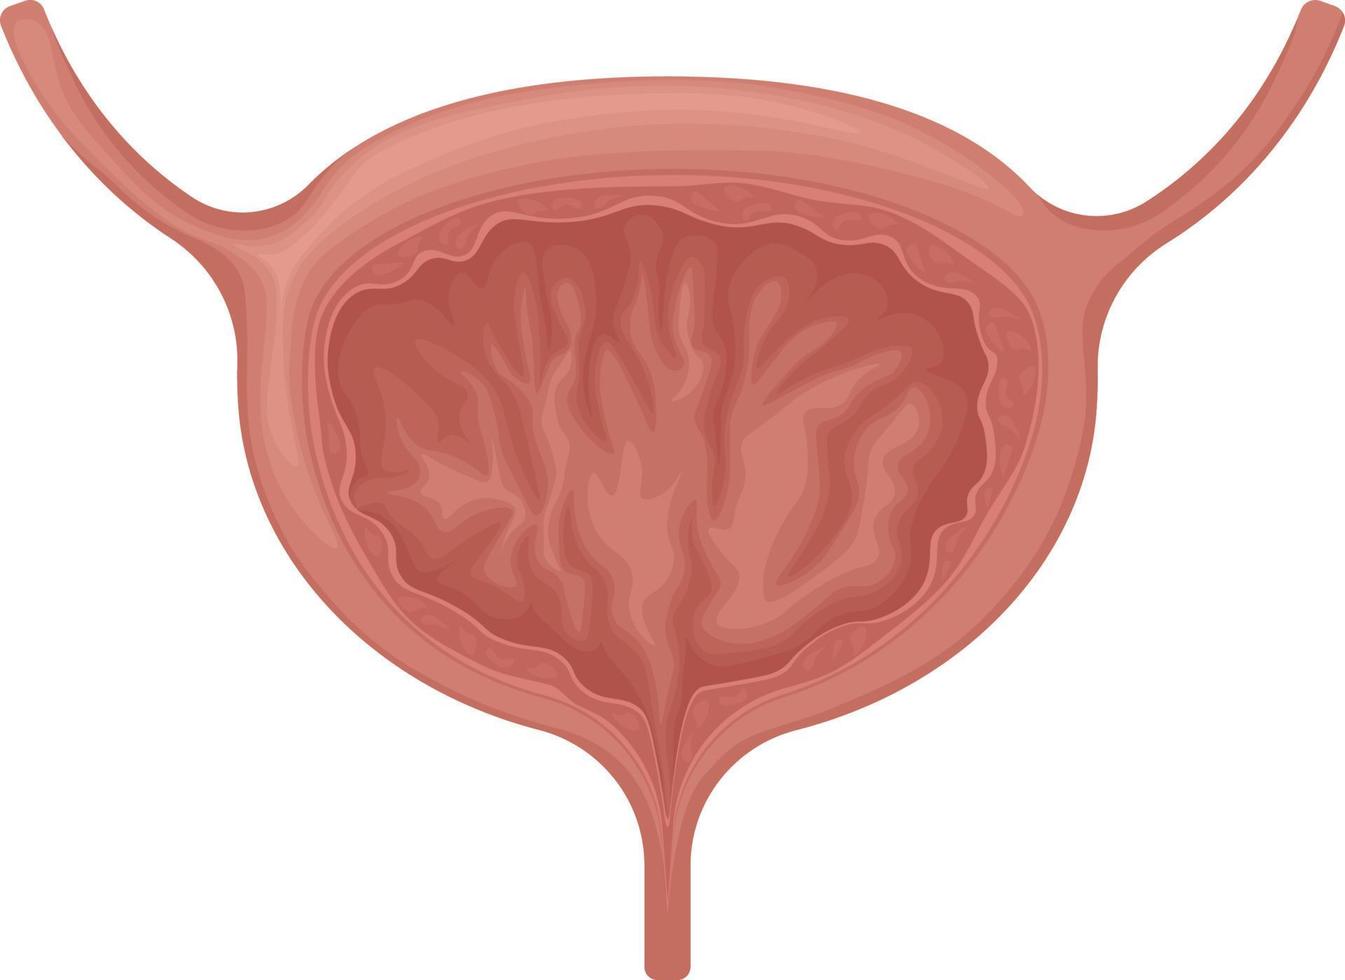 The bladder. Anatomy of the human bladder. The internal organ of a person. Vector illustration isolated on a white background. Medicine